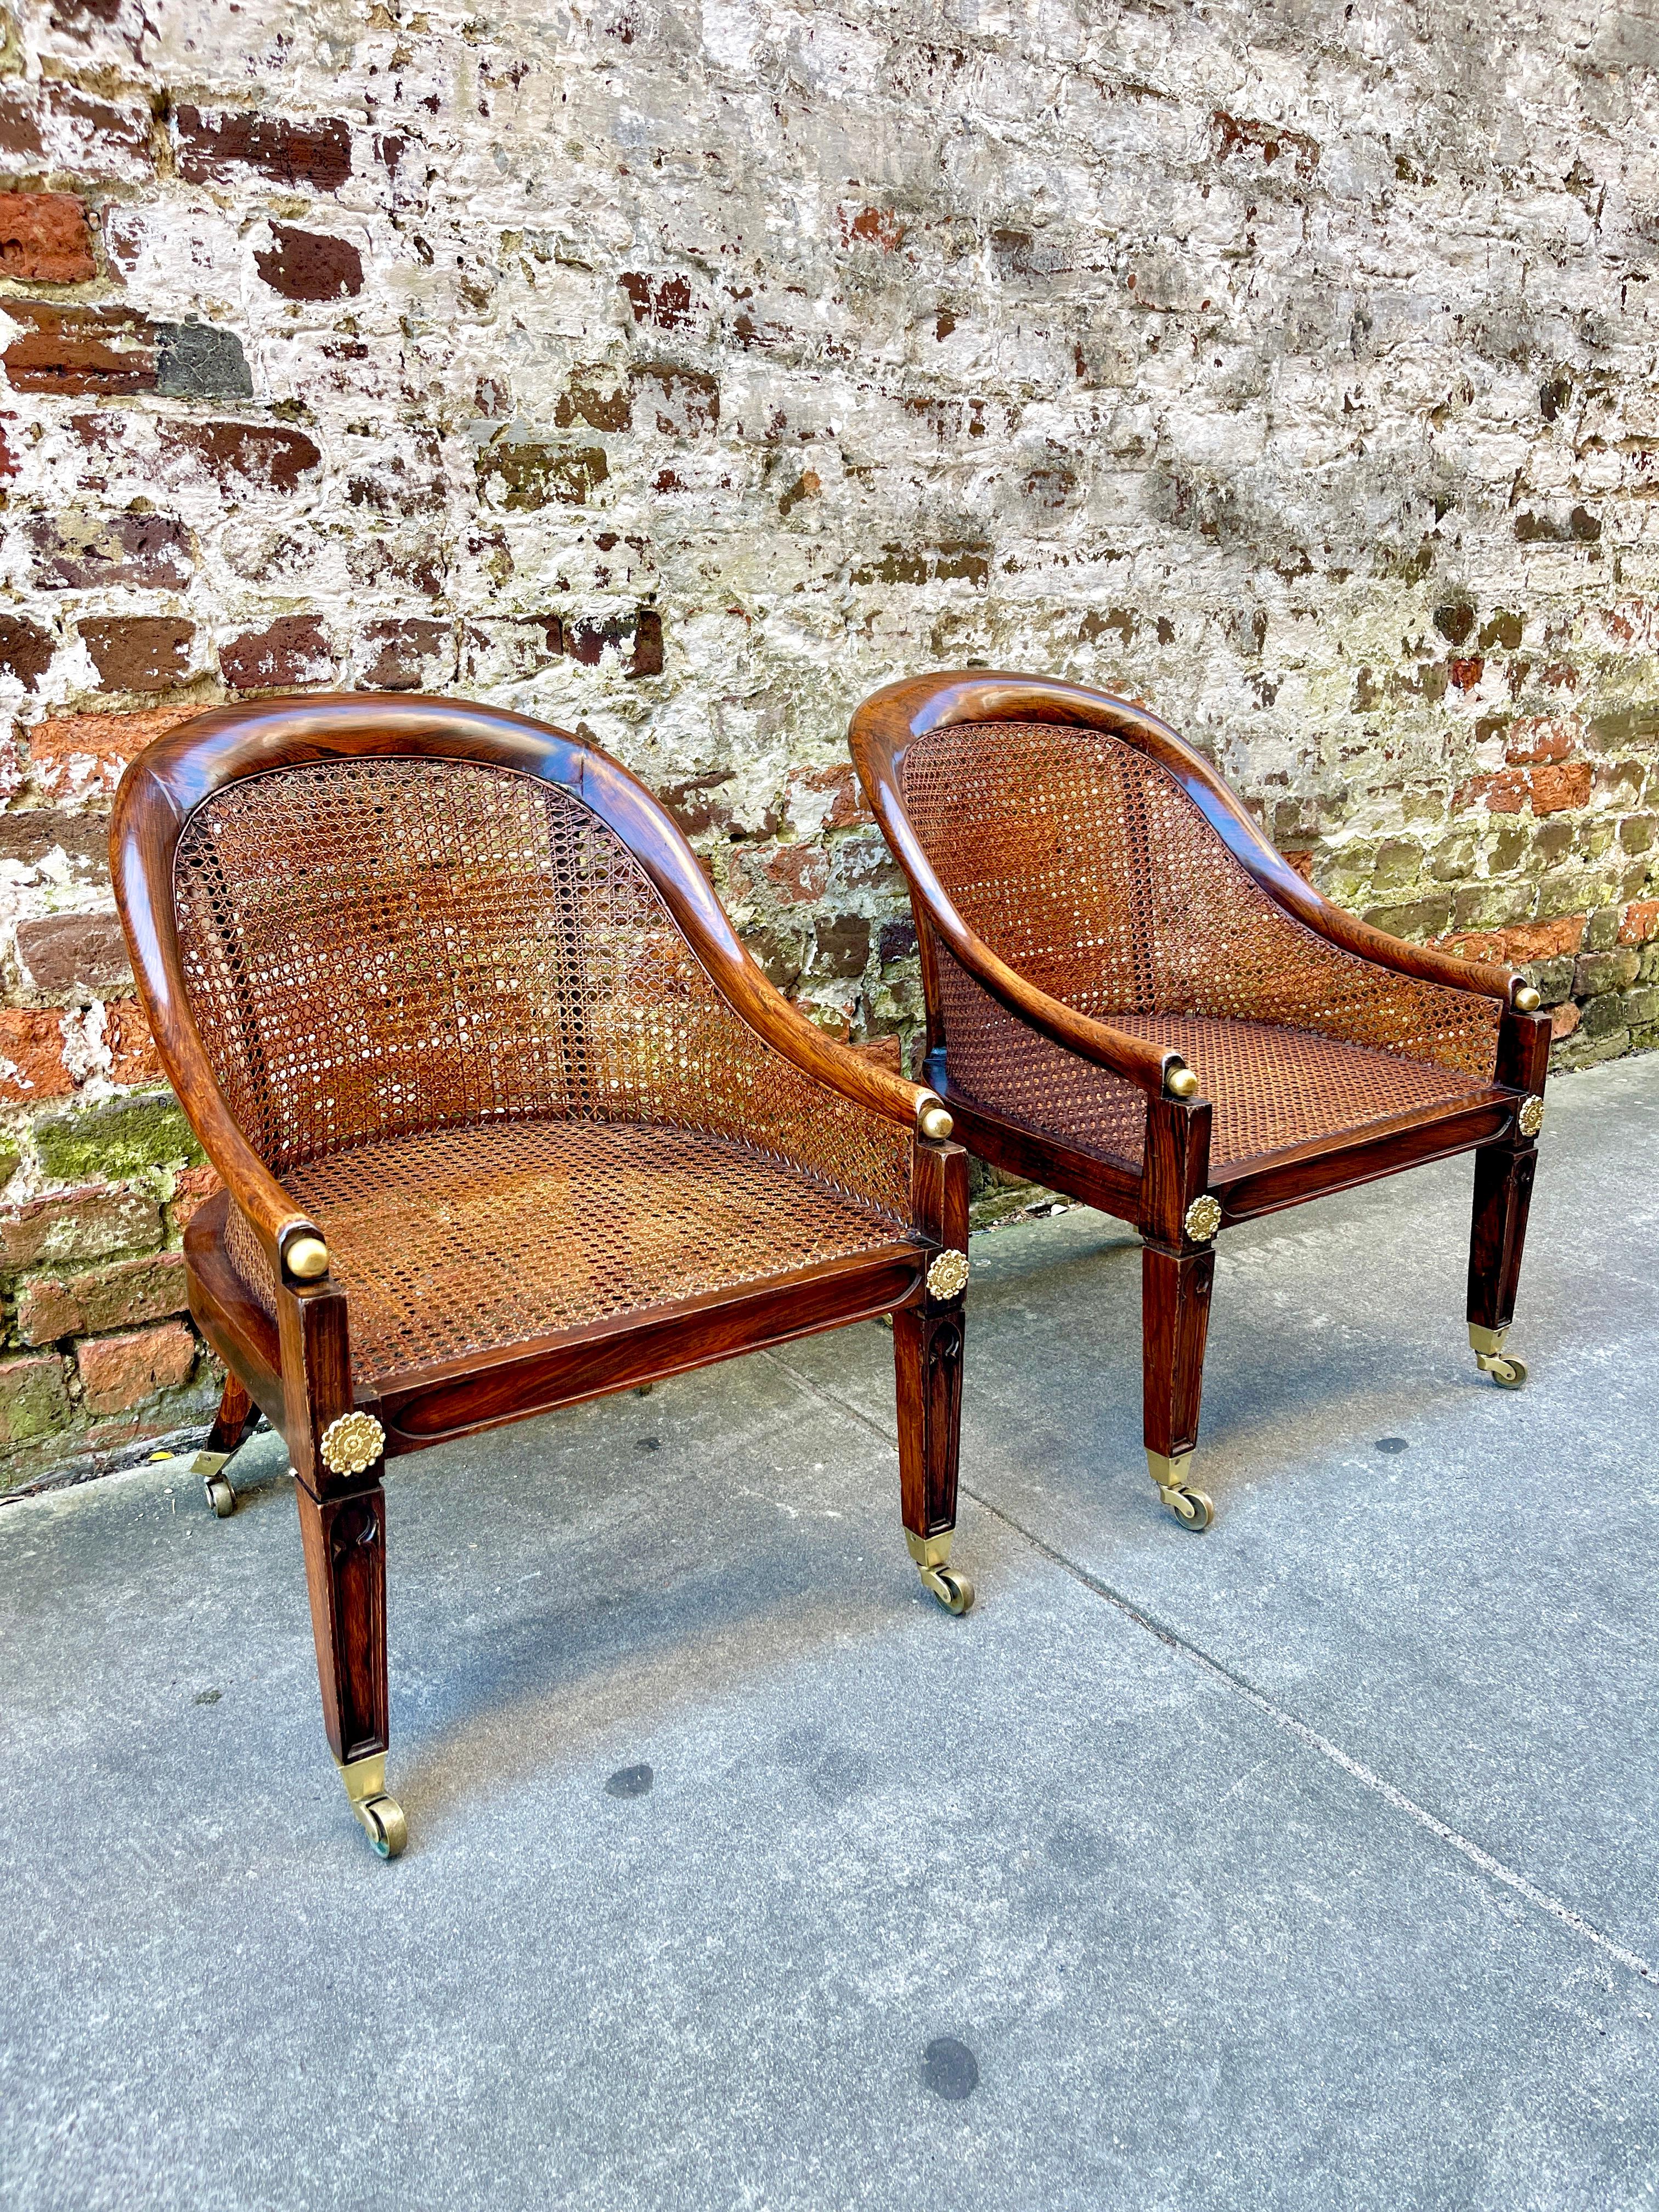 Pair of cane chairs on brass casters. Faux rosewood grain with gold gilt accents. Low size allows window or flanking fireplace placement. 